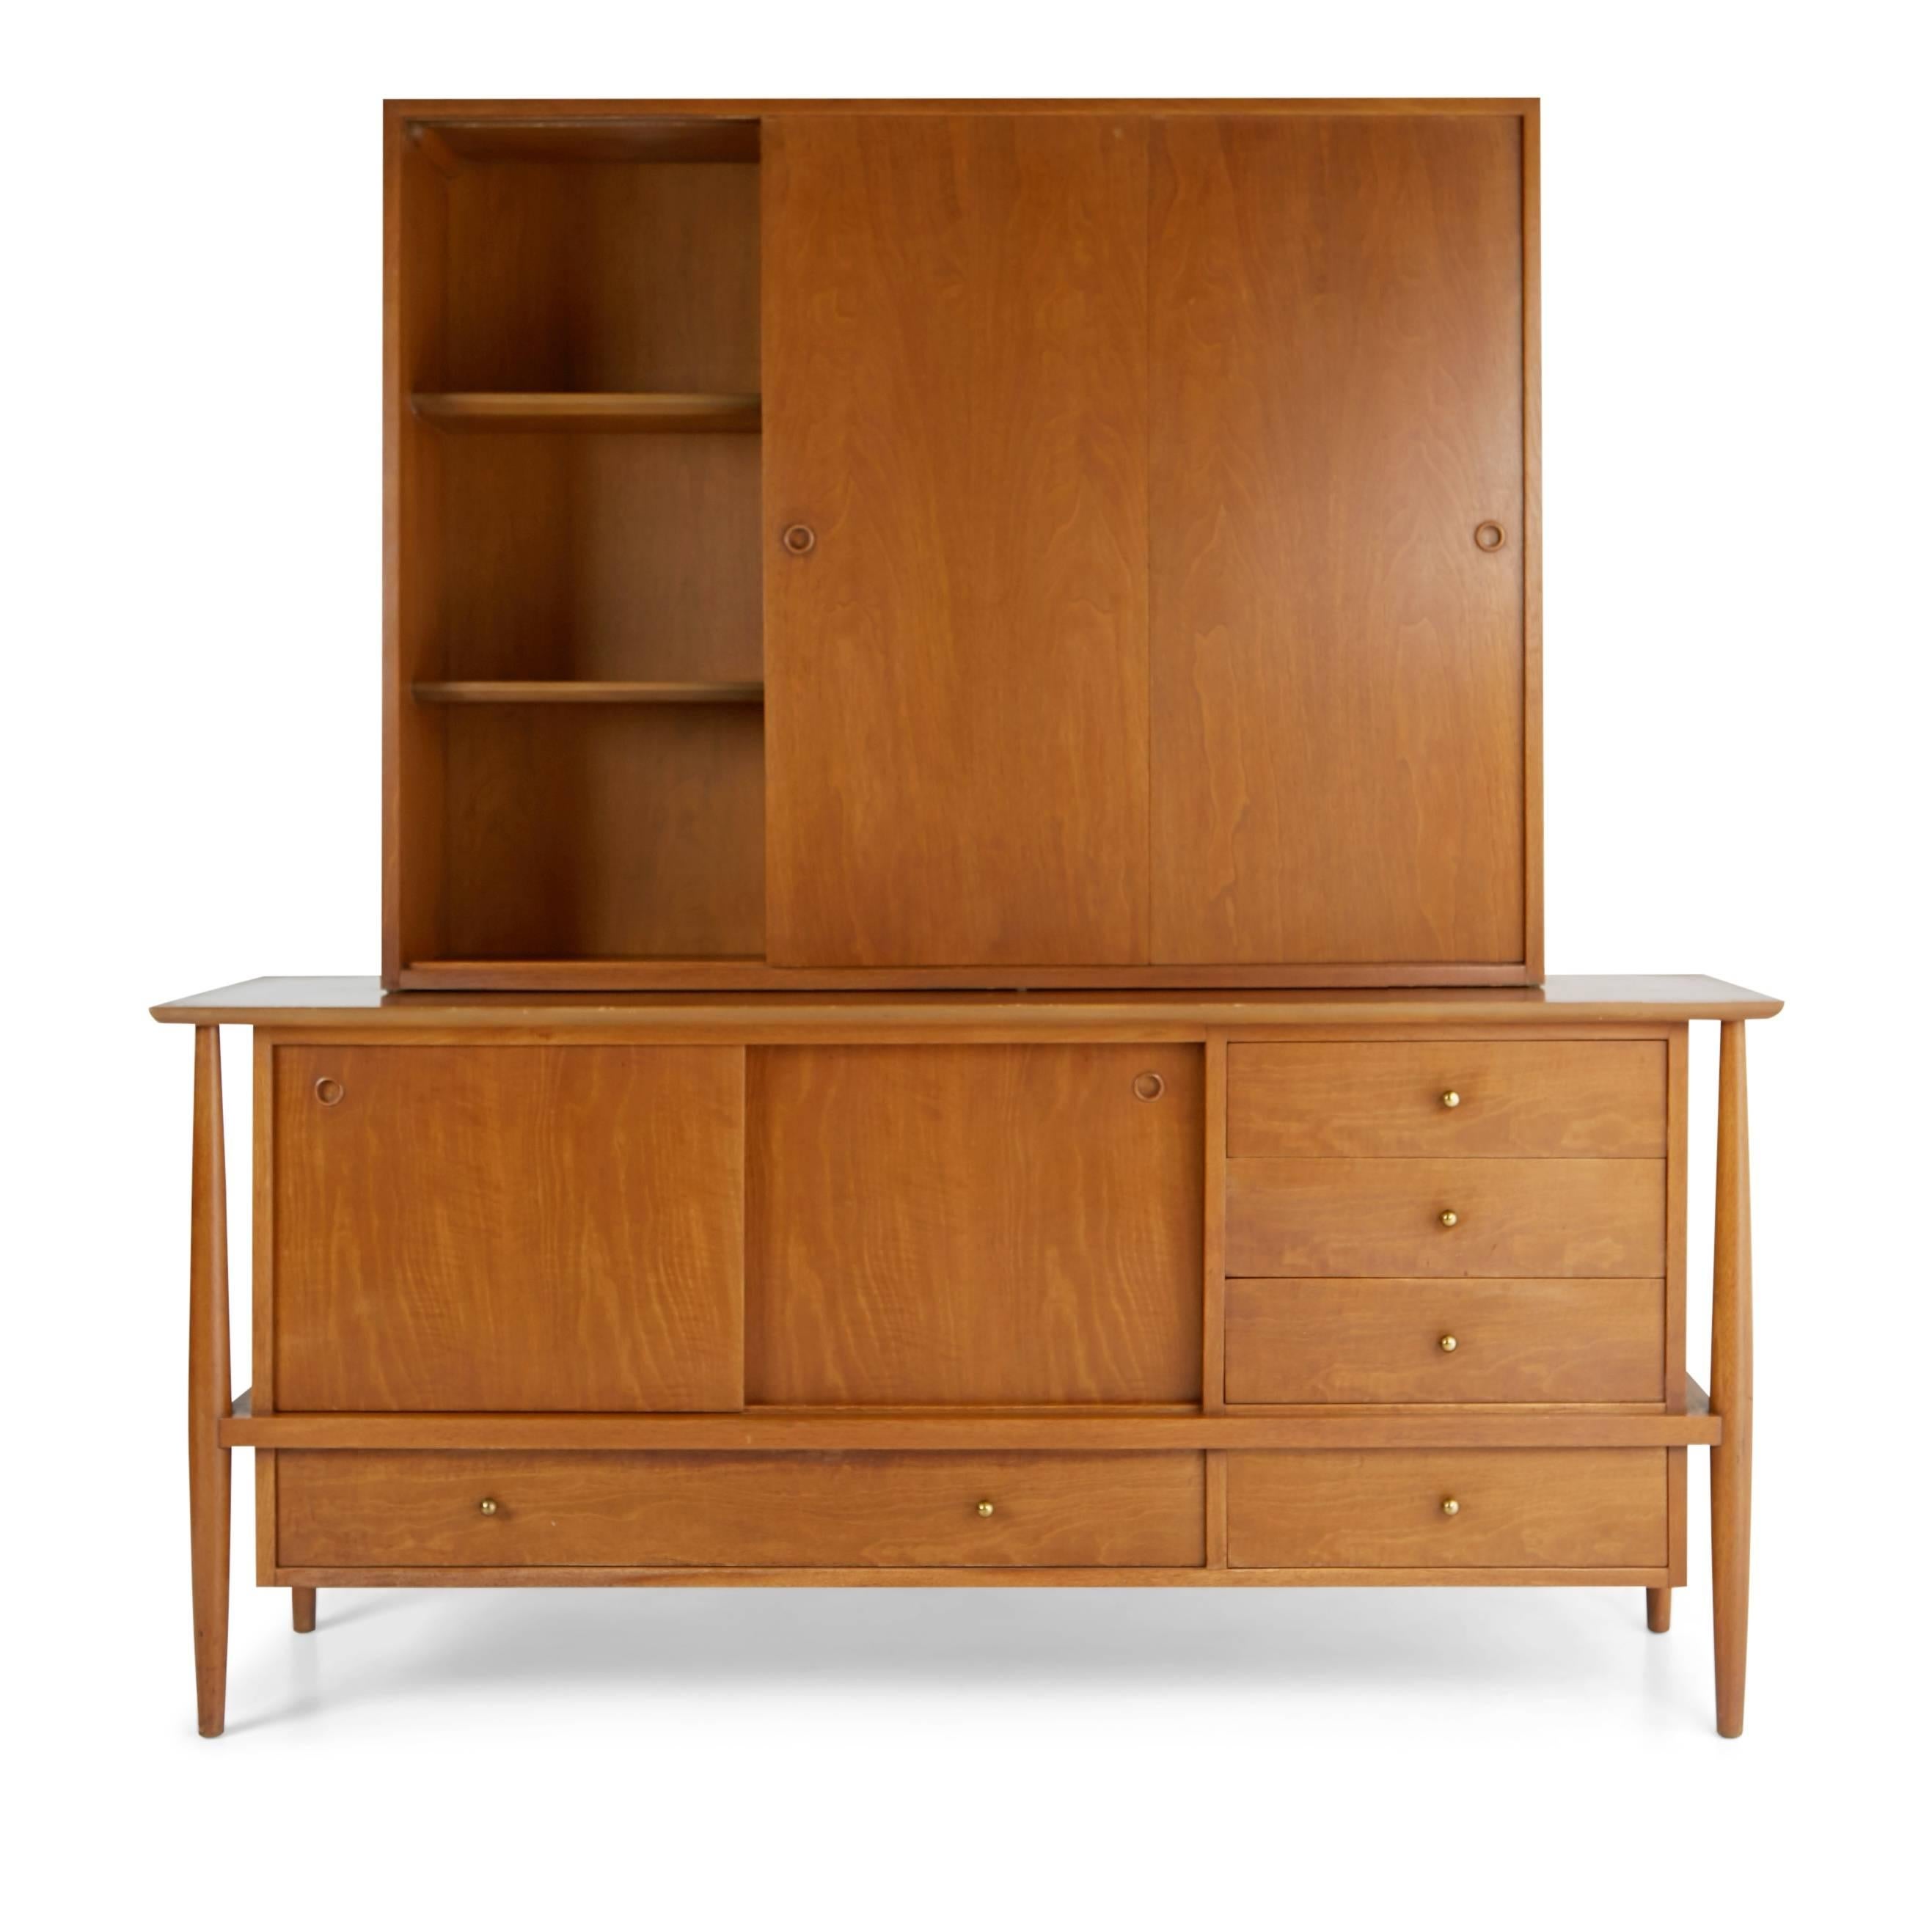 Mid-Century Modern two-piece display hutch and buffet in the style of Finn Juhl and Edmond Spence. Fabricated from walnut this grand scaled piece provides plenty of storage. The display cabinet has a central sliding glass panel flanked by sliding